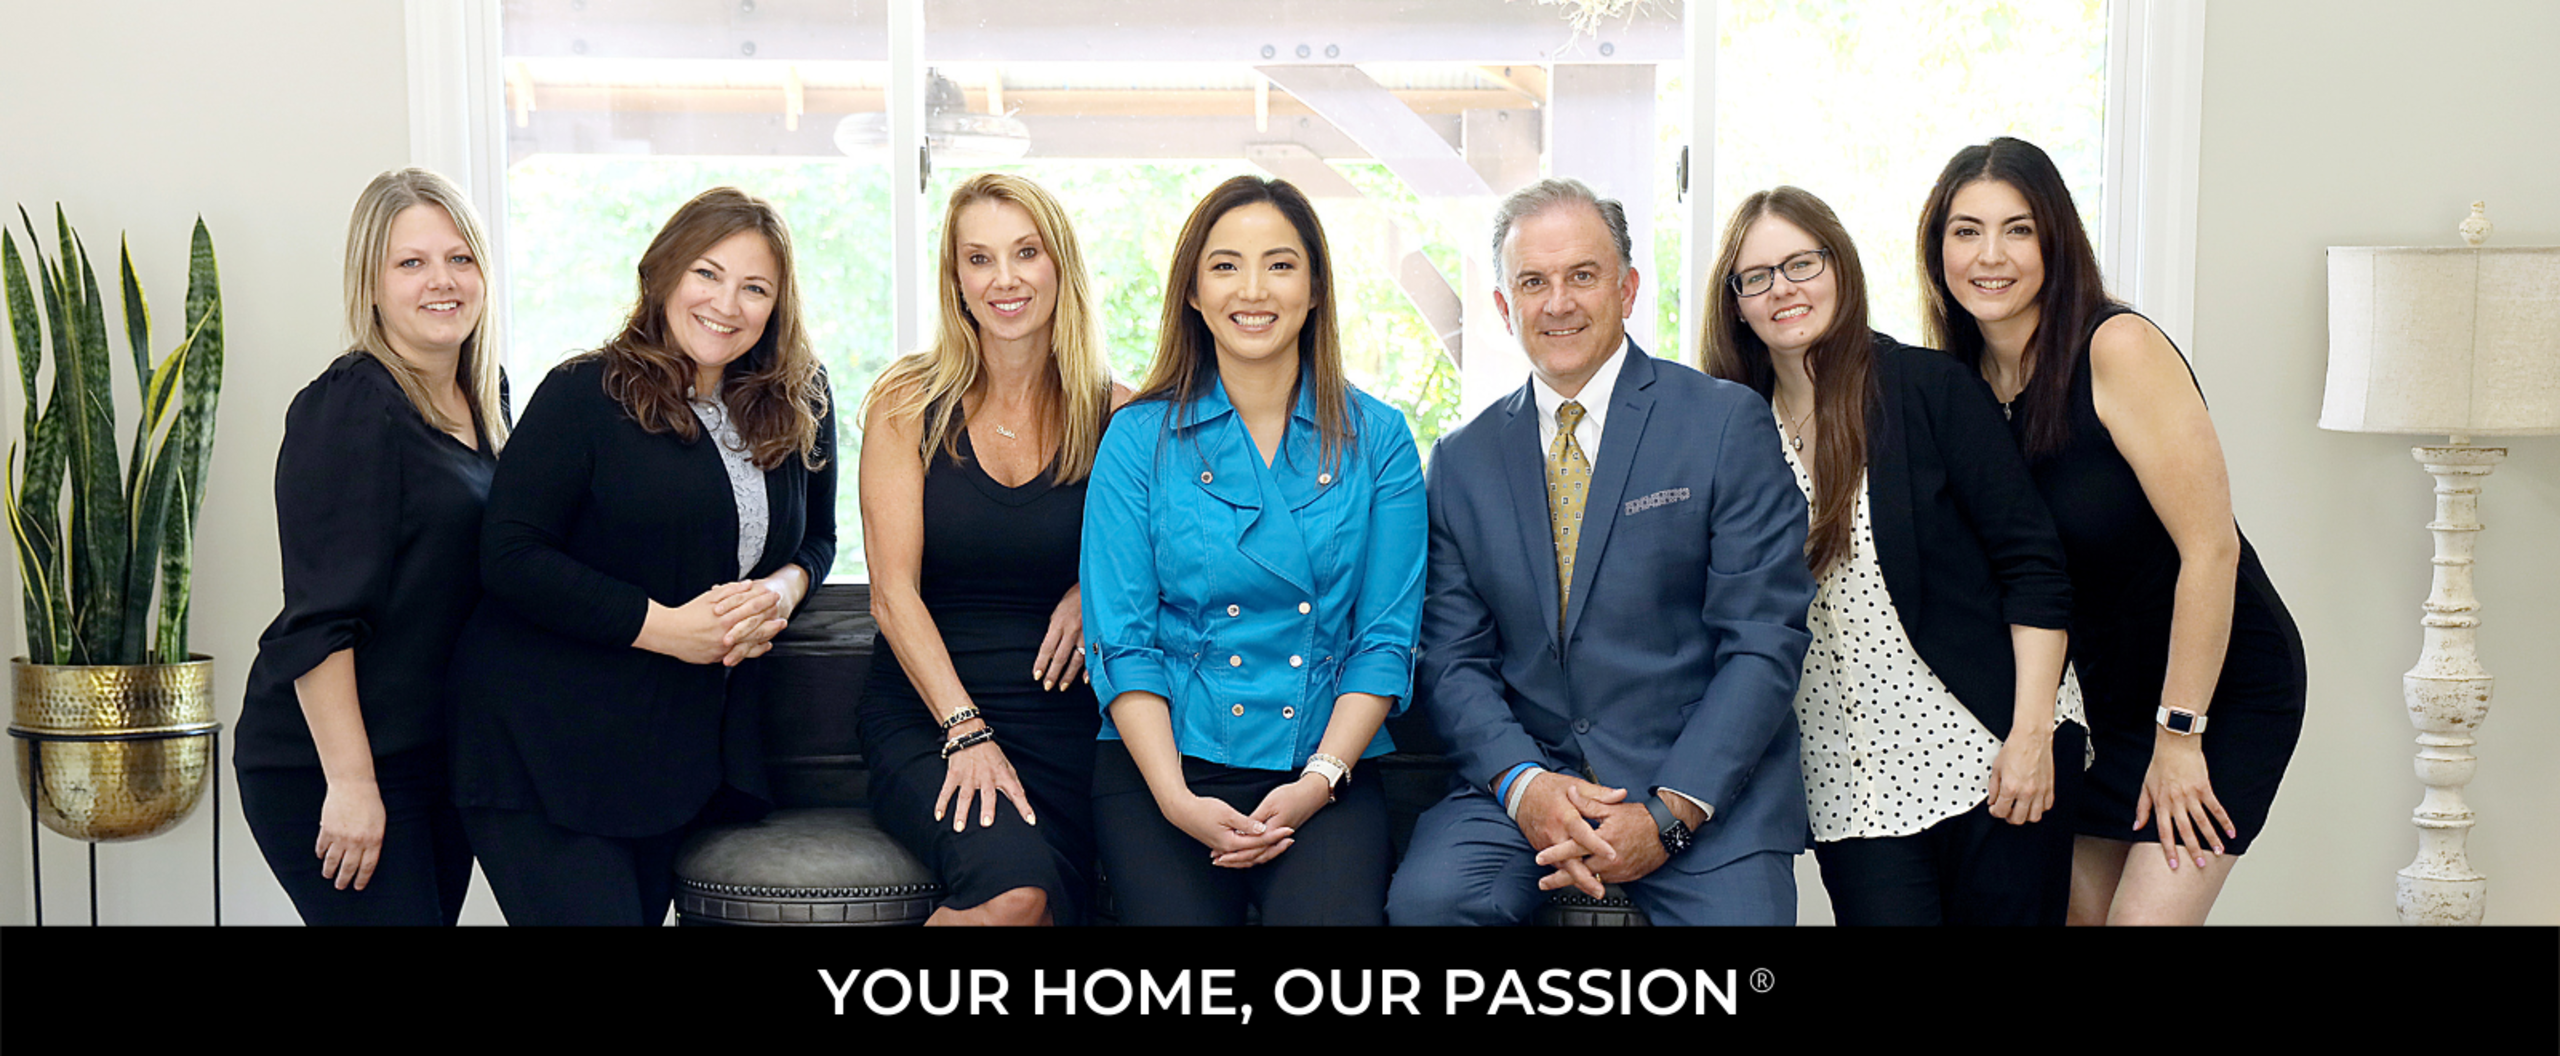 Your Home, Our Passion®